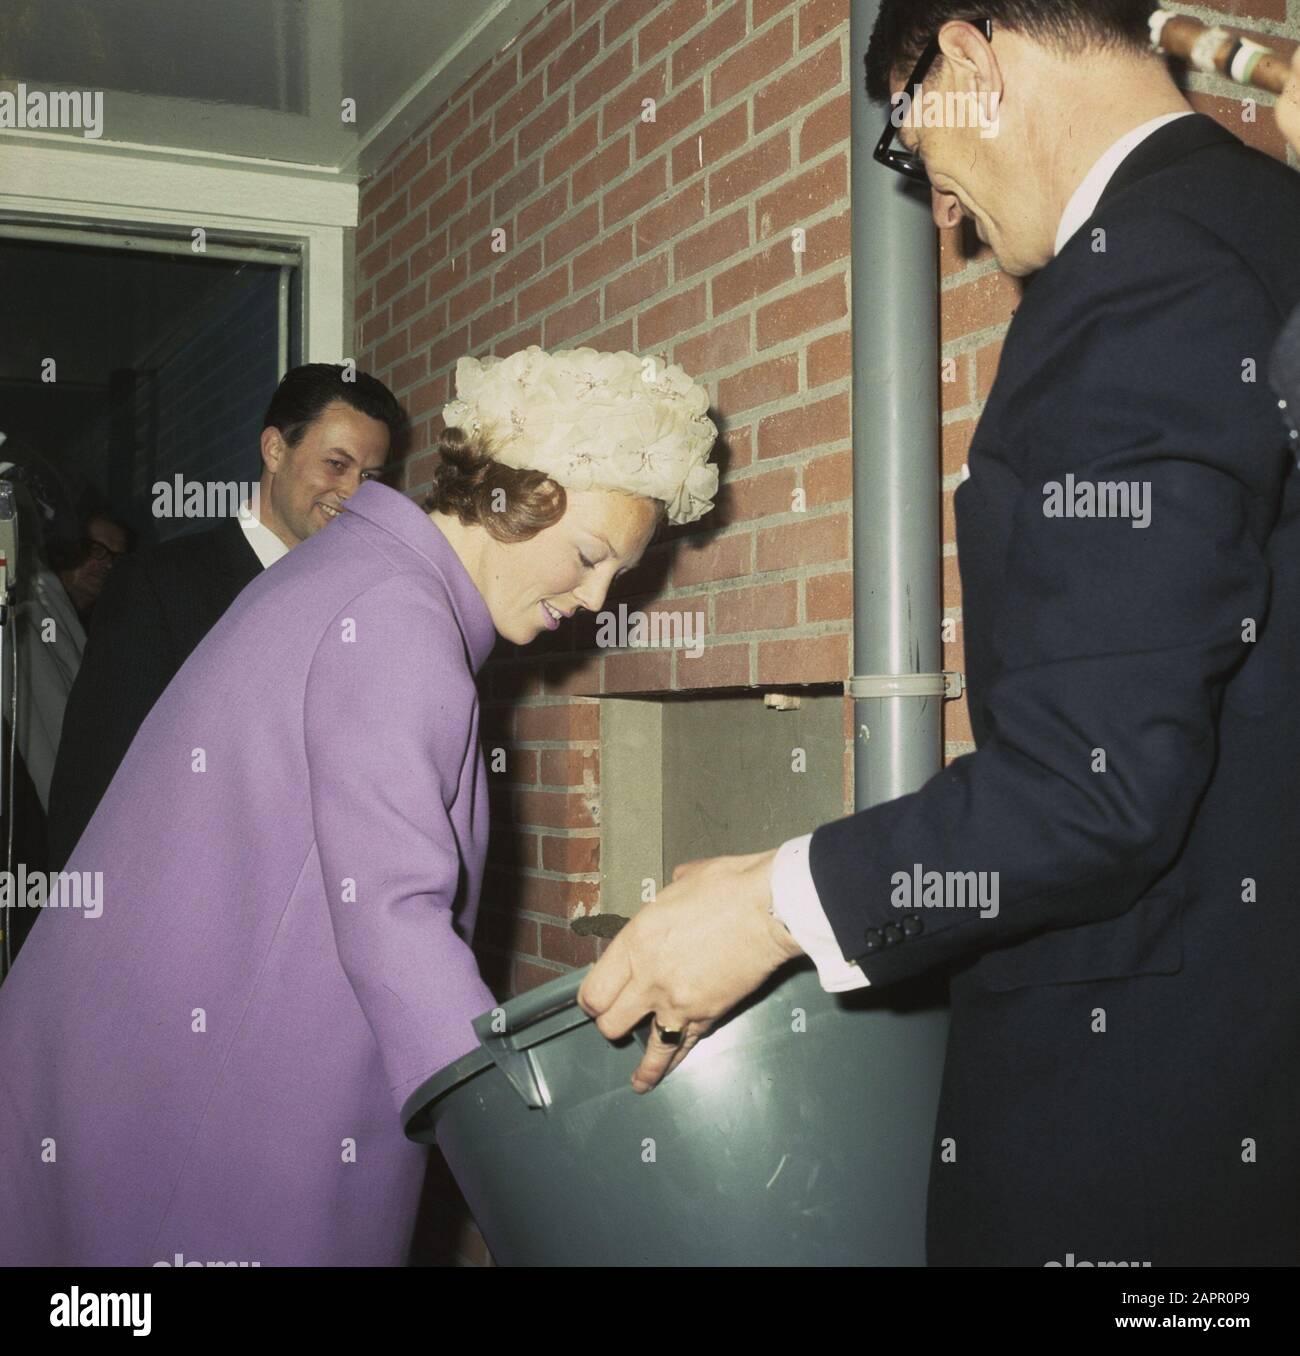 Her Royal Highness Princess Beatrix in Roden (Drenthe) opens holiday centre for disabled youth, Prince Willem Alexander farm Date: 8 May 1968 Location: Drenthe, Roden Keywords: openings Personal name: Beatrix, princess Stock Photo